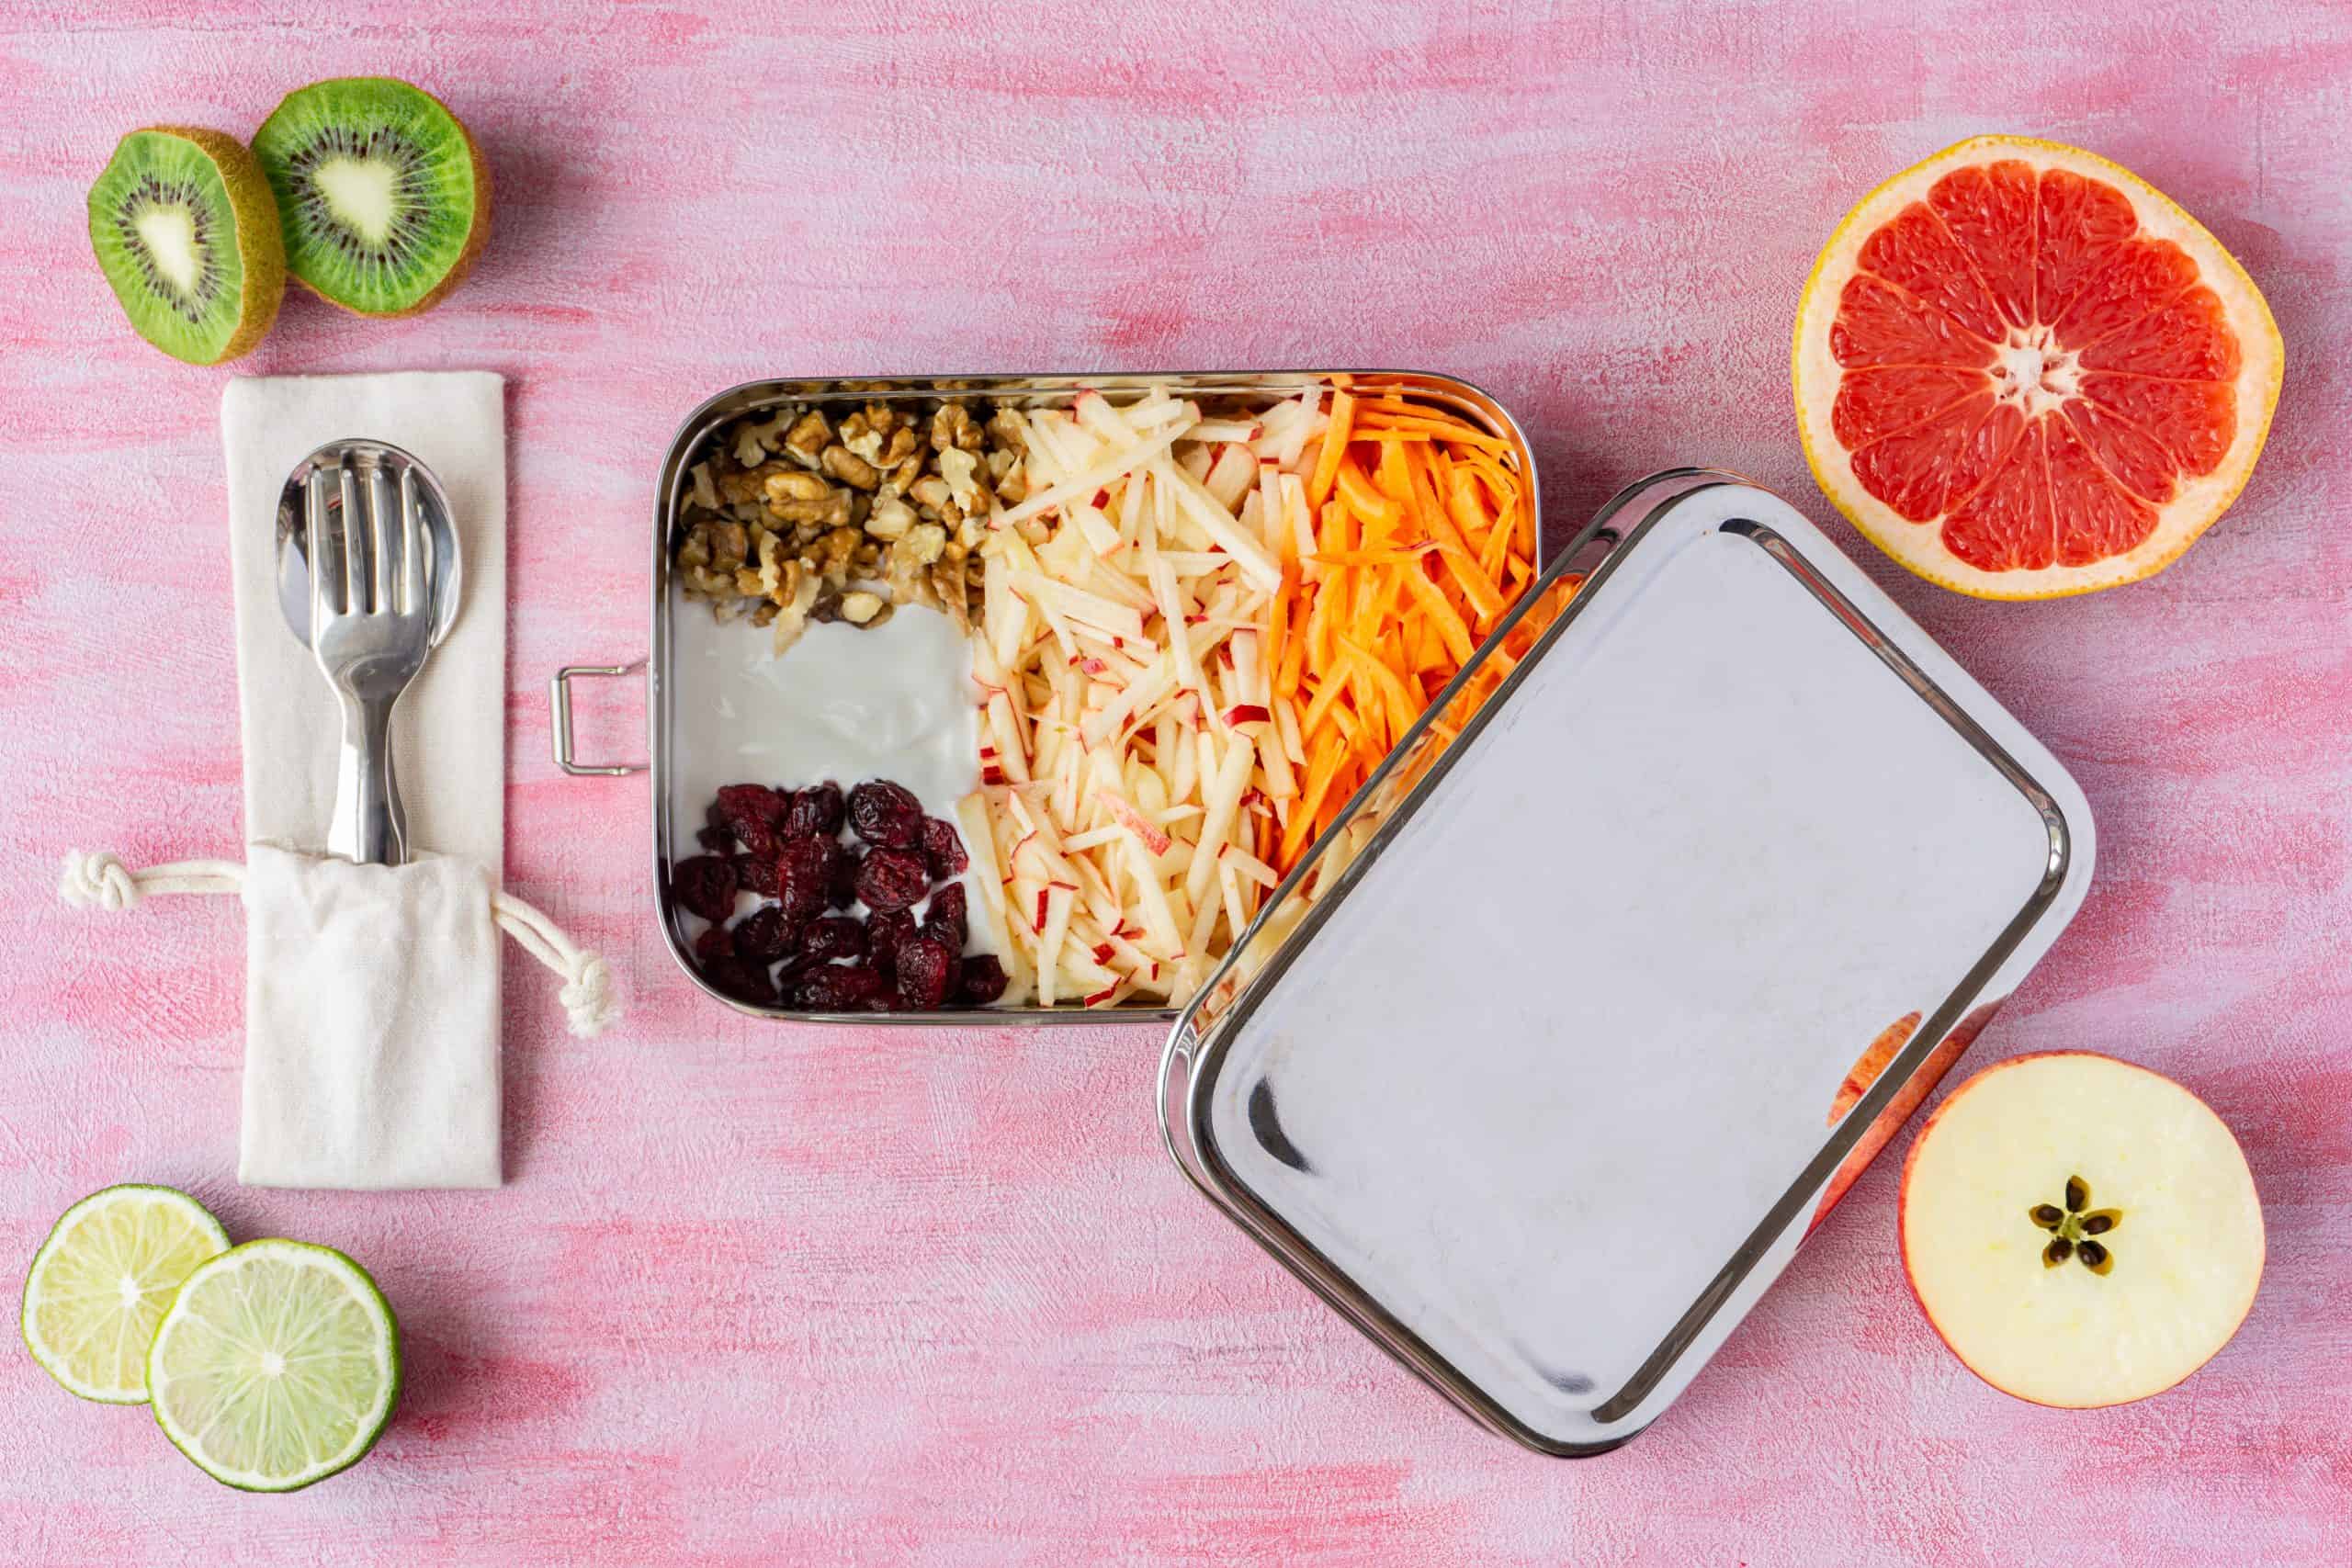 The 7 Best Plastic-Free Lunchboxes